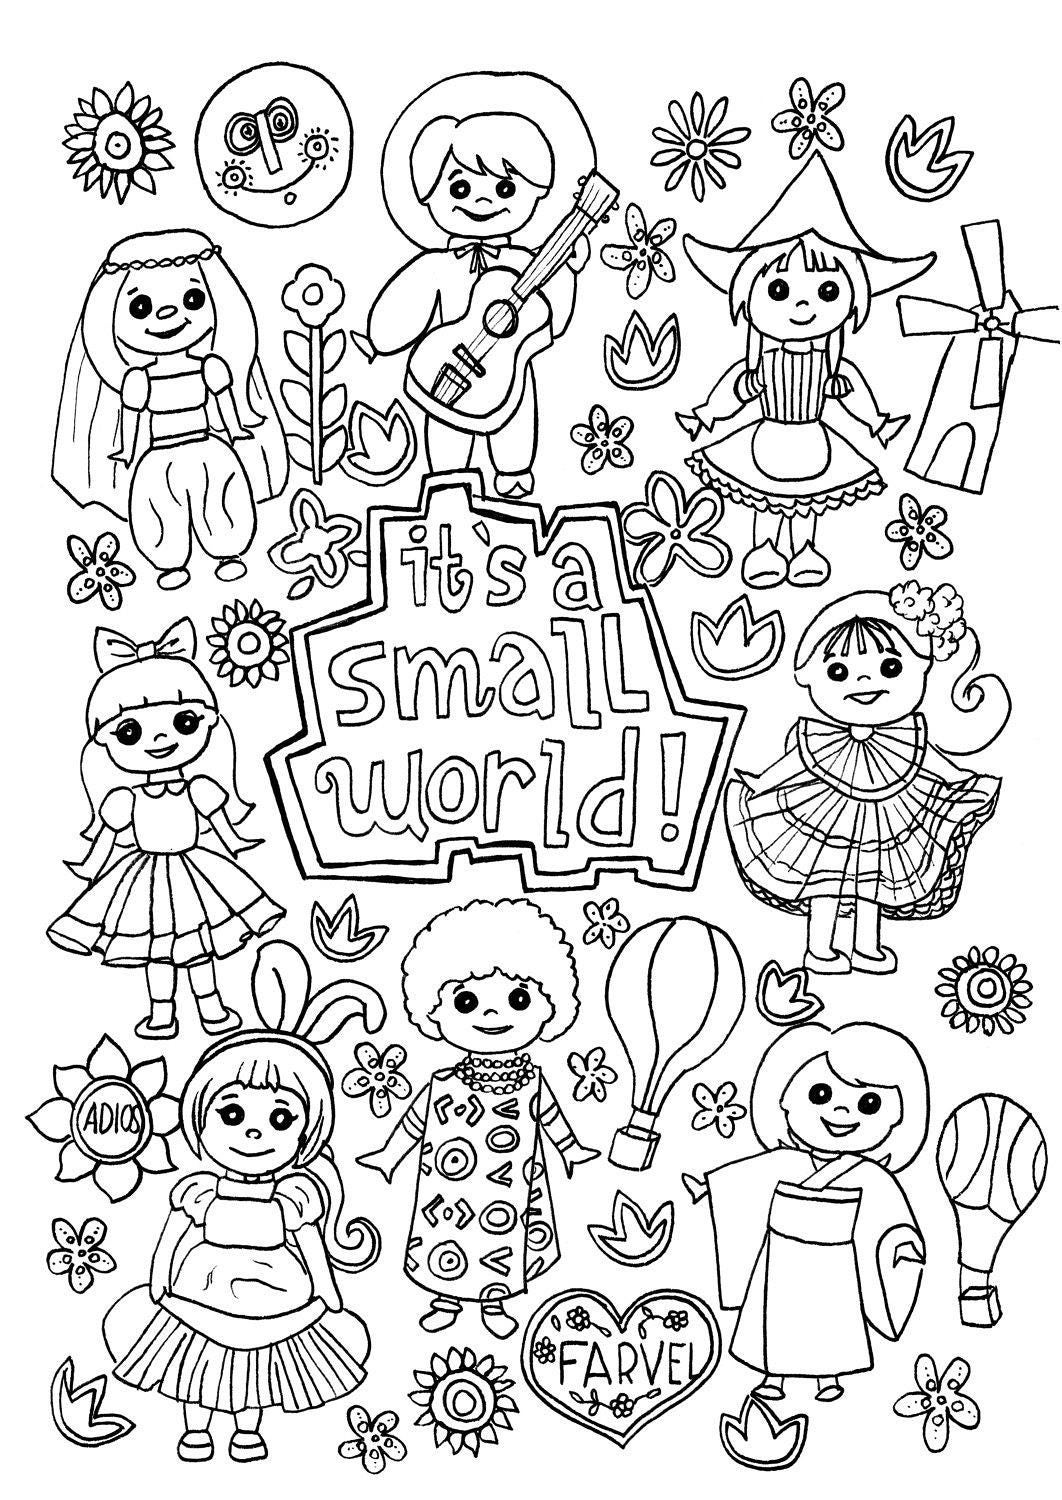 Its a Small World Coloring Page Digital Download Disney Etsy